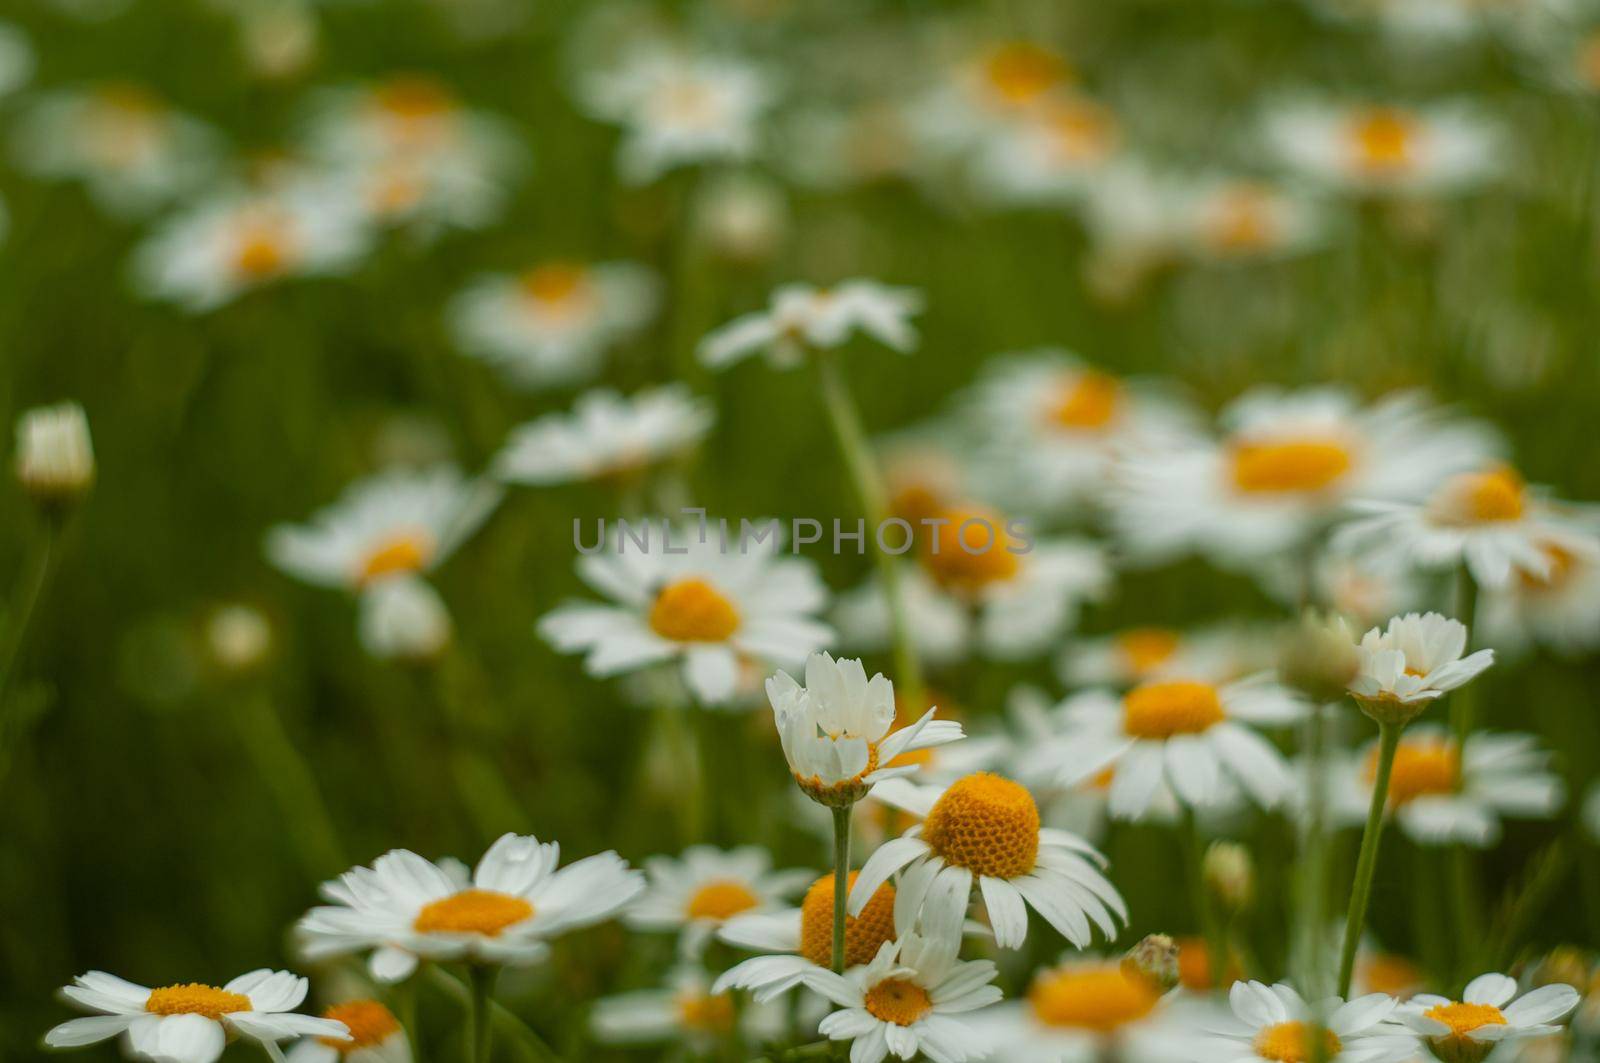 Wild Chamomile flower close-up with blurred background photography